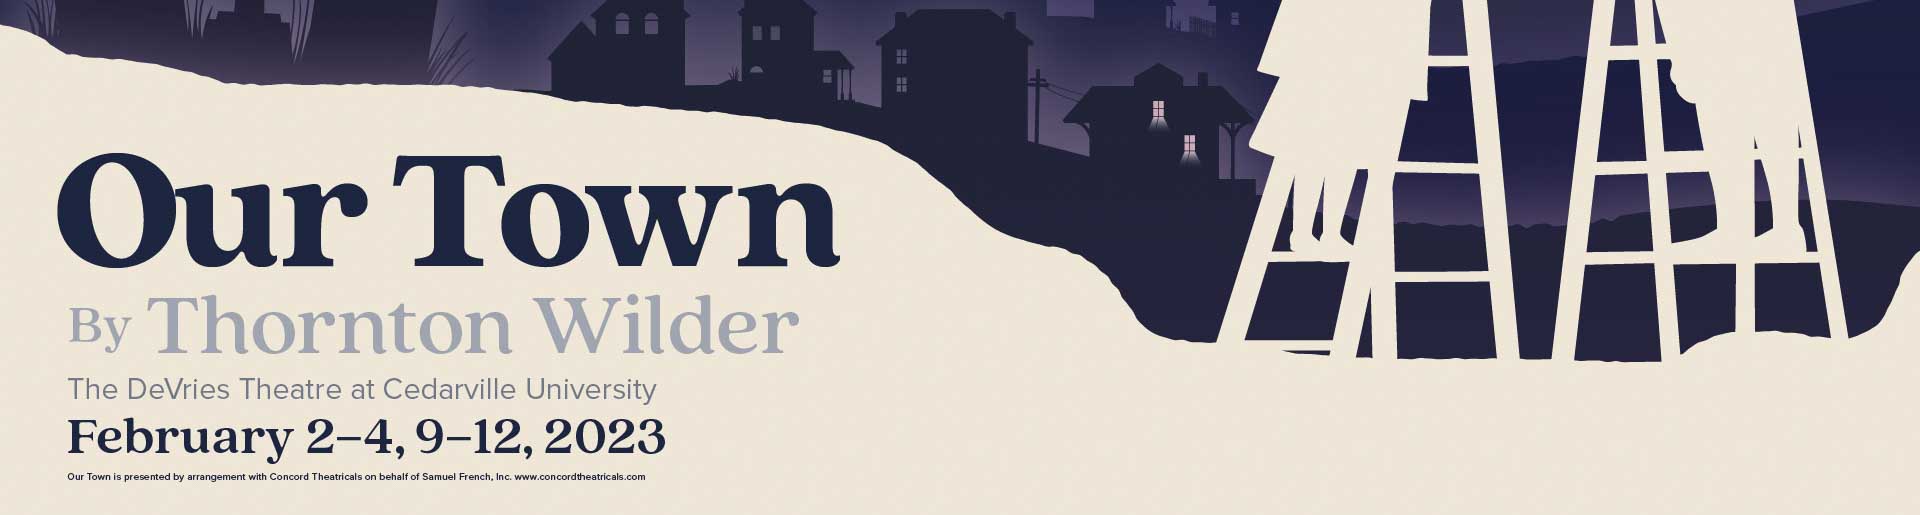 Cedarville University puts on “Our Town” by Thornton Wilder